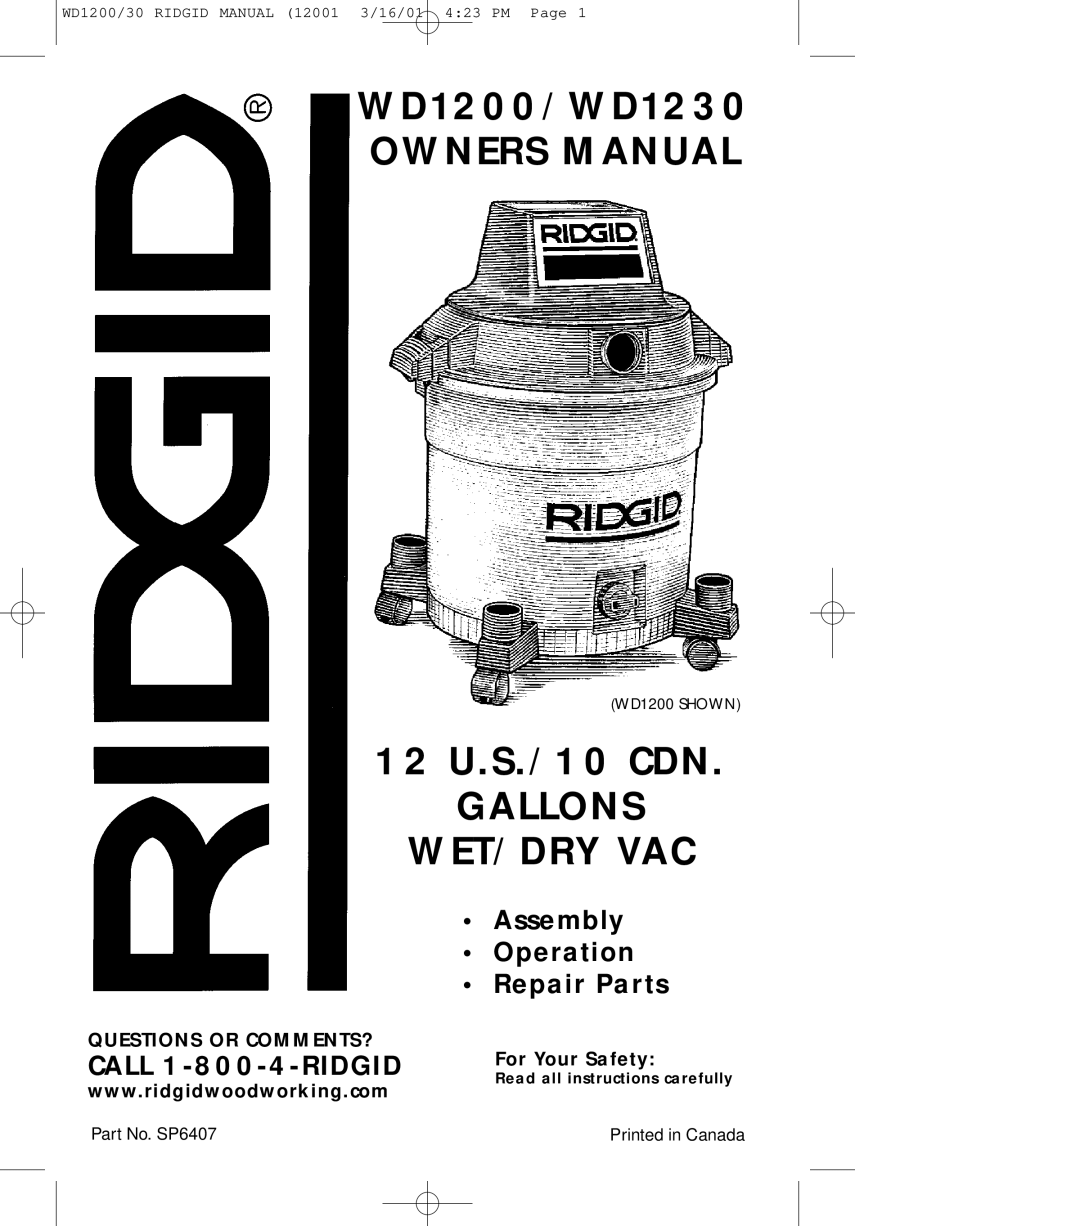 RIDGID WD1200 owner manual 12 U.S./10 CDN GALLONS WET/DRY VAC, Assembly Operation Repair Parts, Questions Or Comments? 